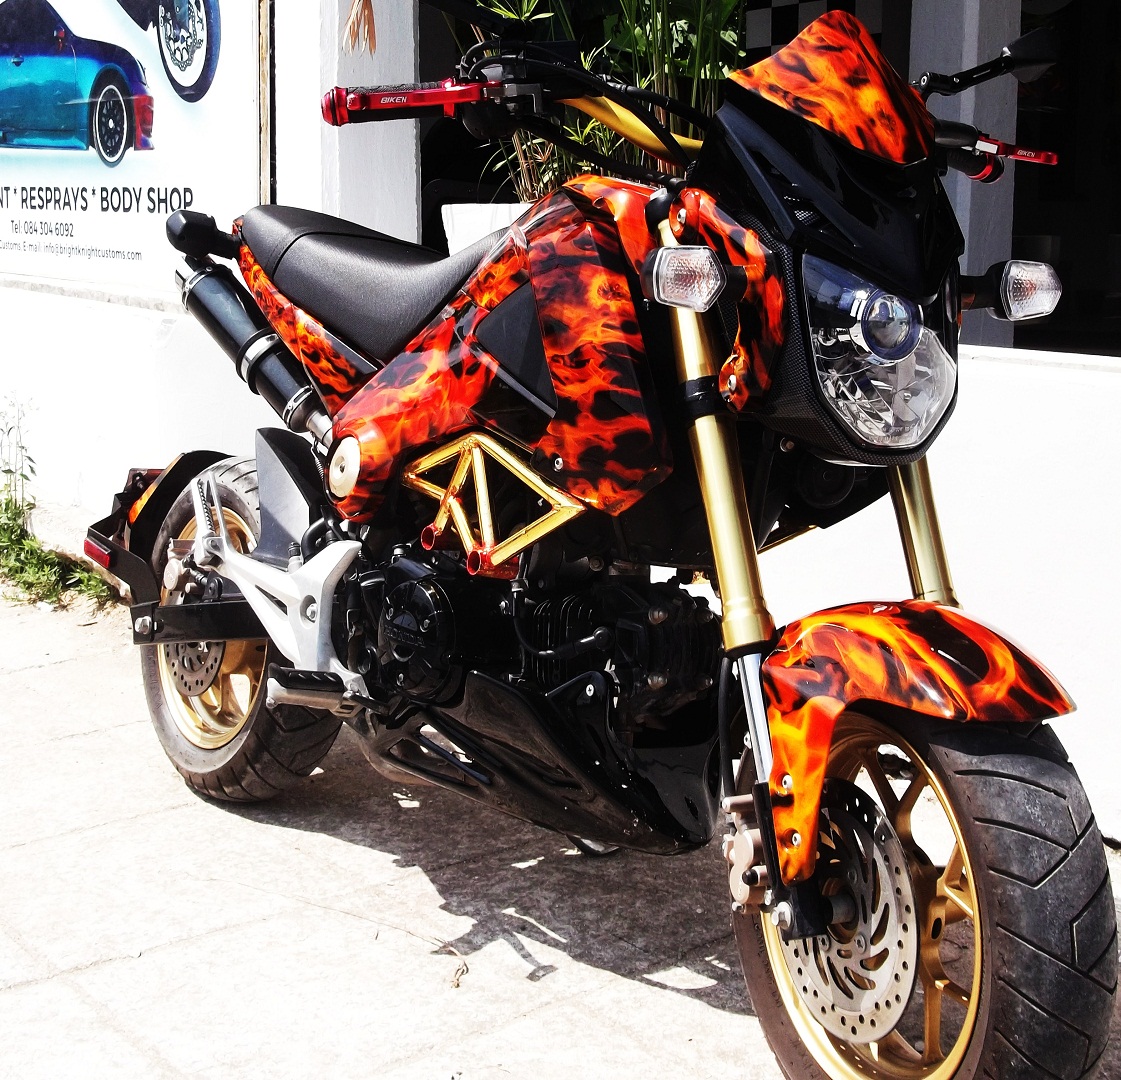 This is a Honda MSX 125 Grom, Hydro dipped in true flames with mini skulls. Has some after market upgrades too, dual exhaust, bottom scoop and top fairing.